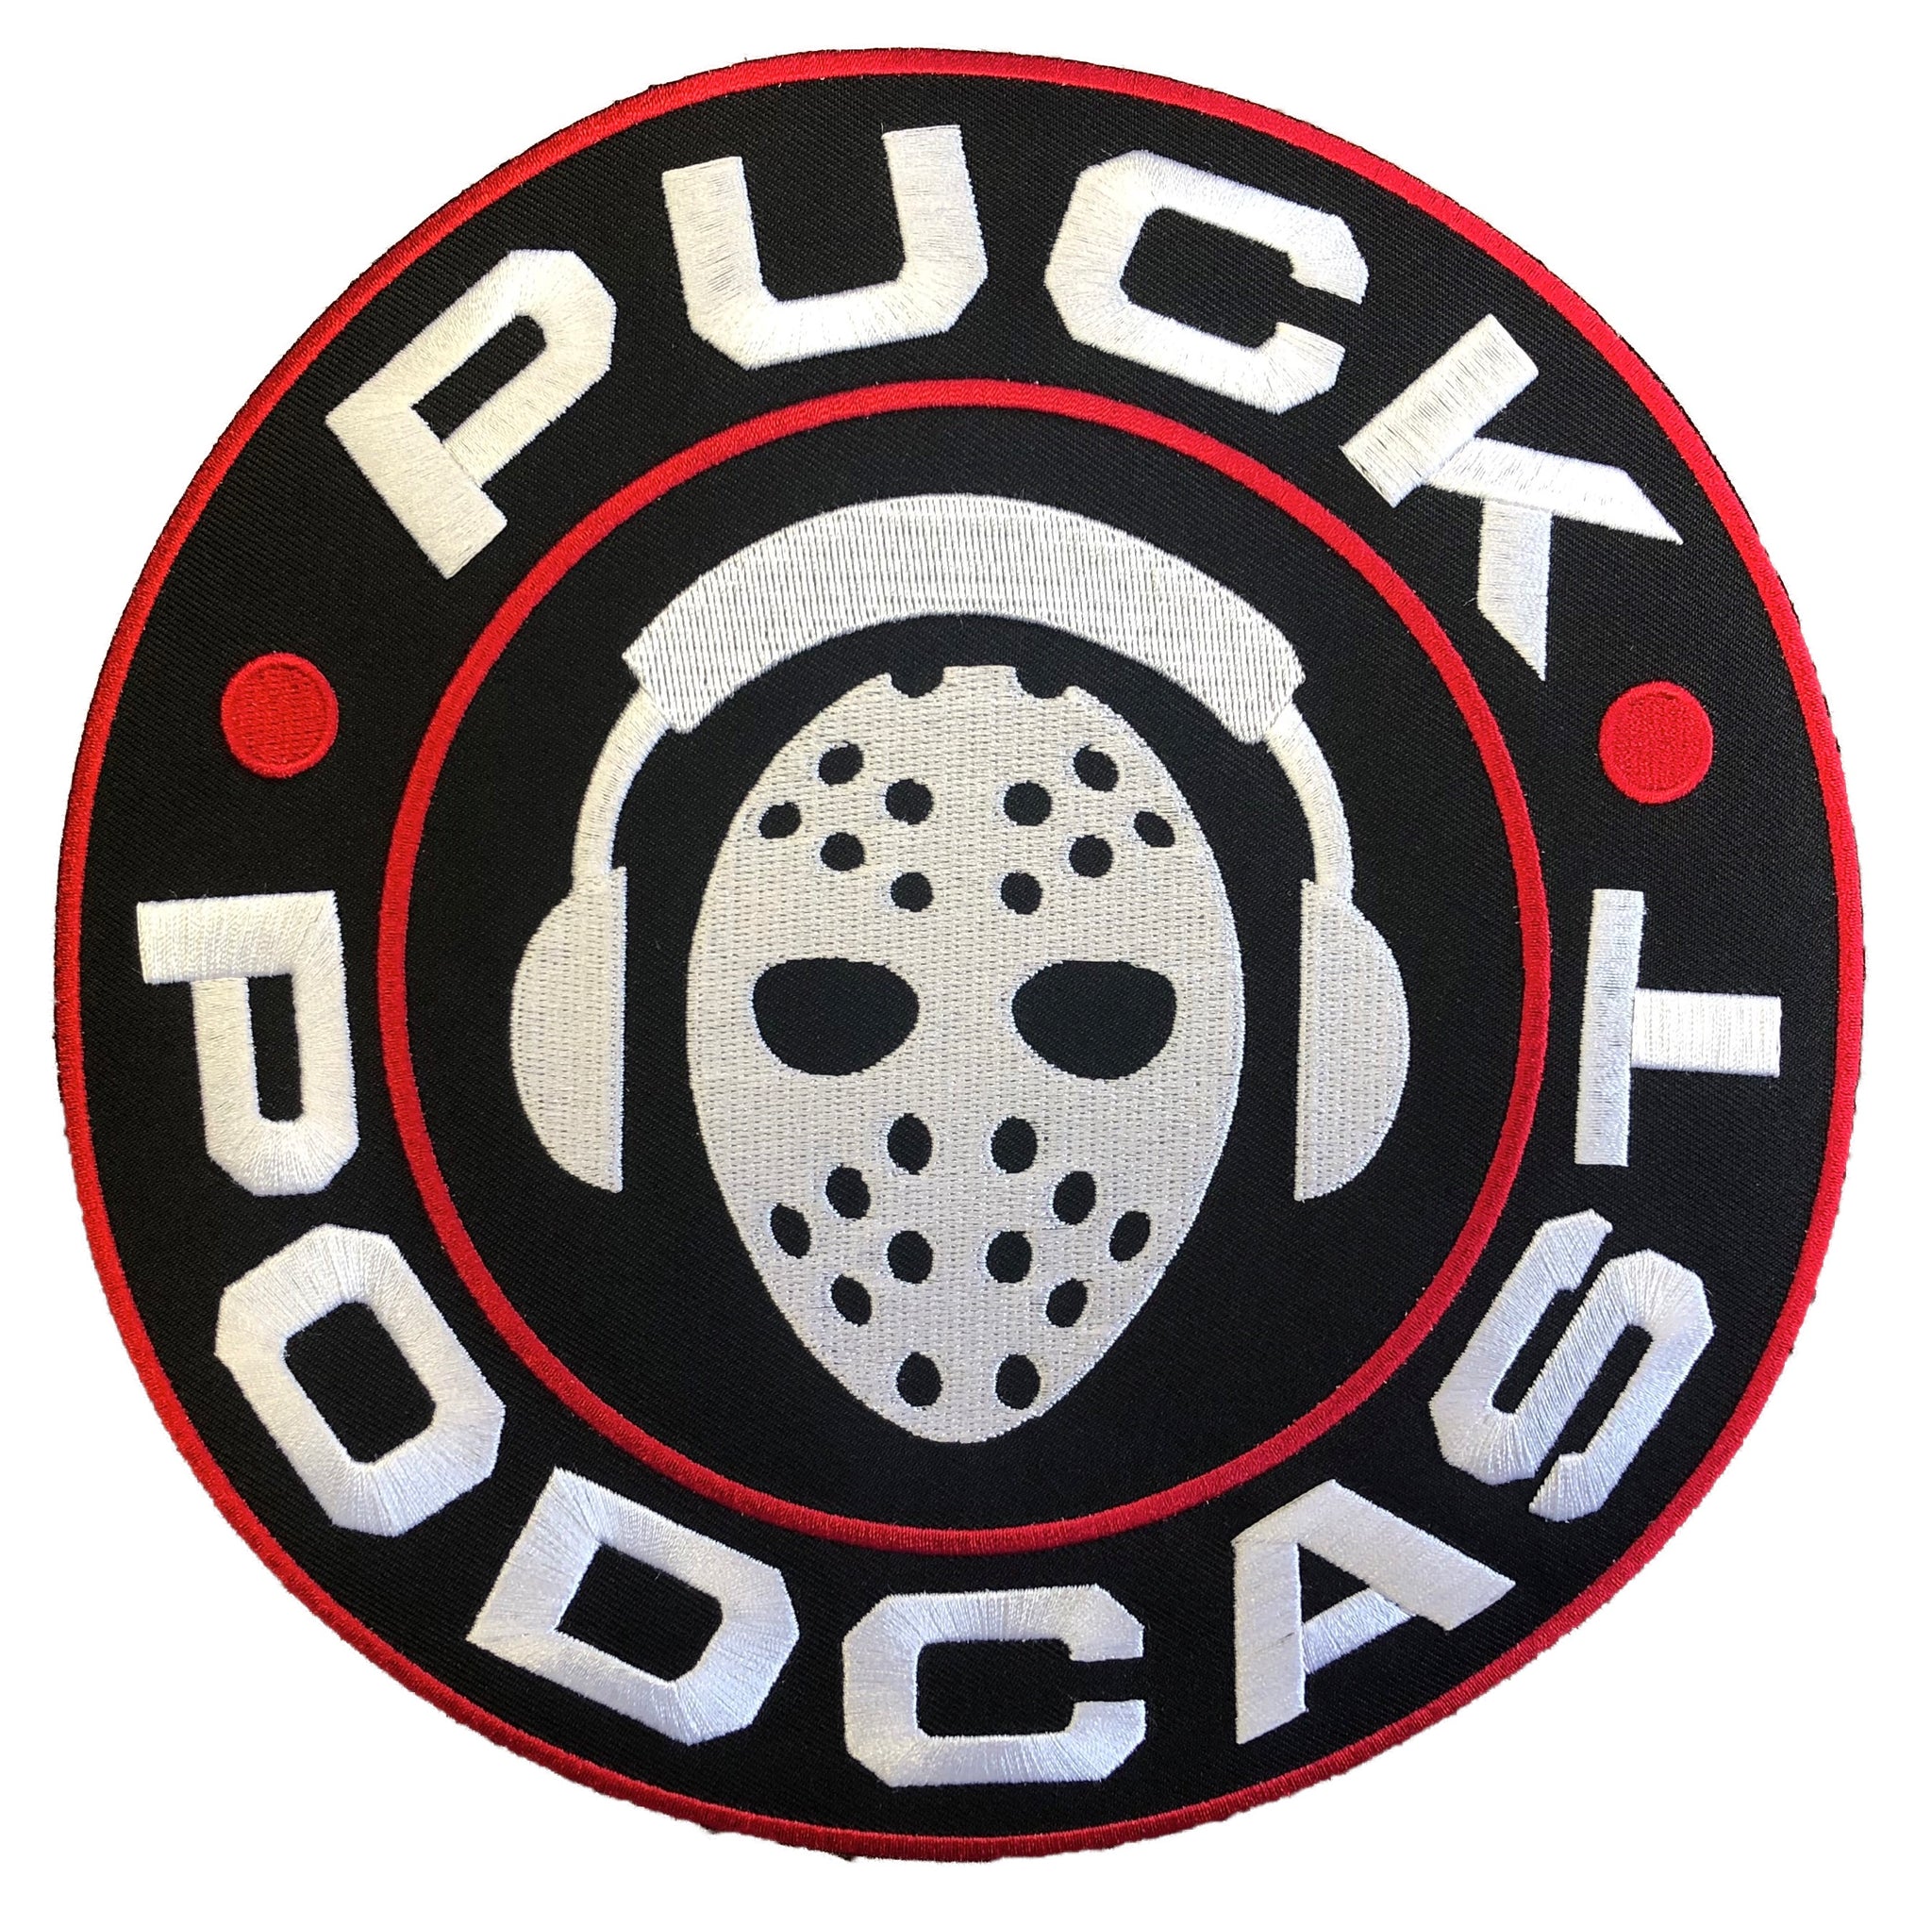 Puck Podcast Hockey Jersey with your Name and Number – Tally